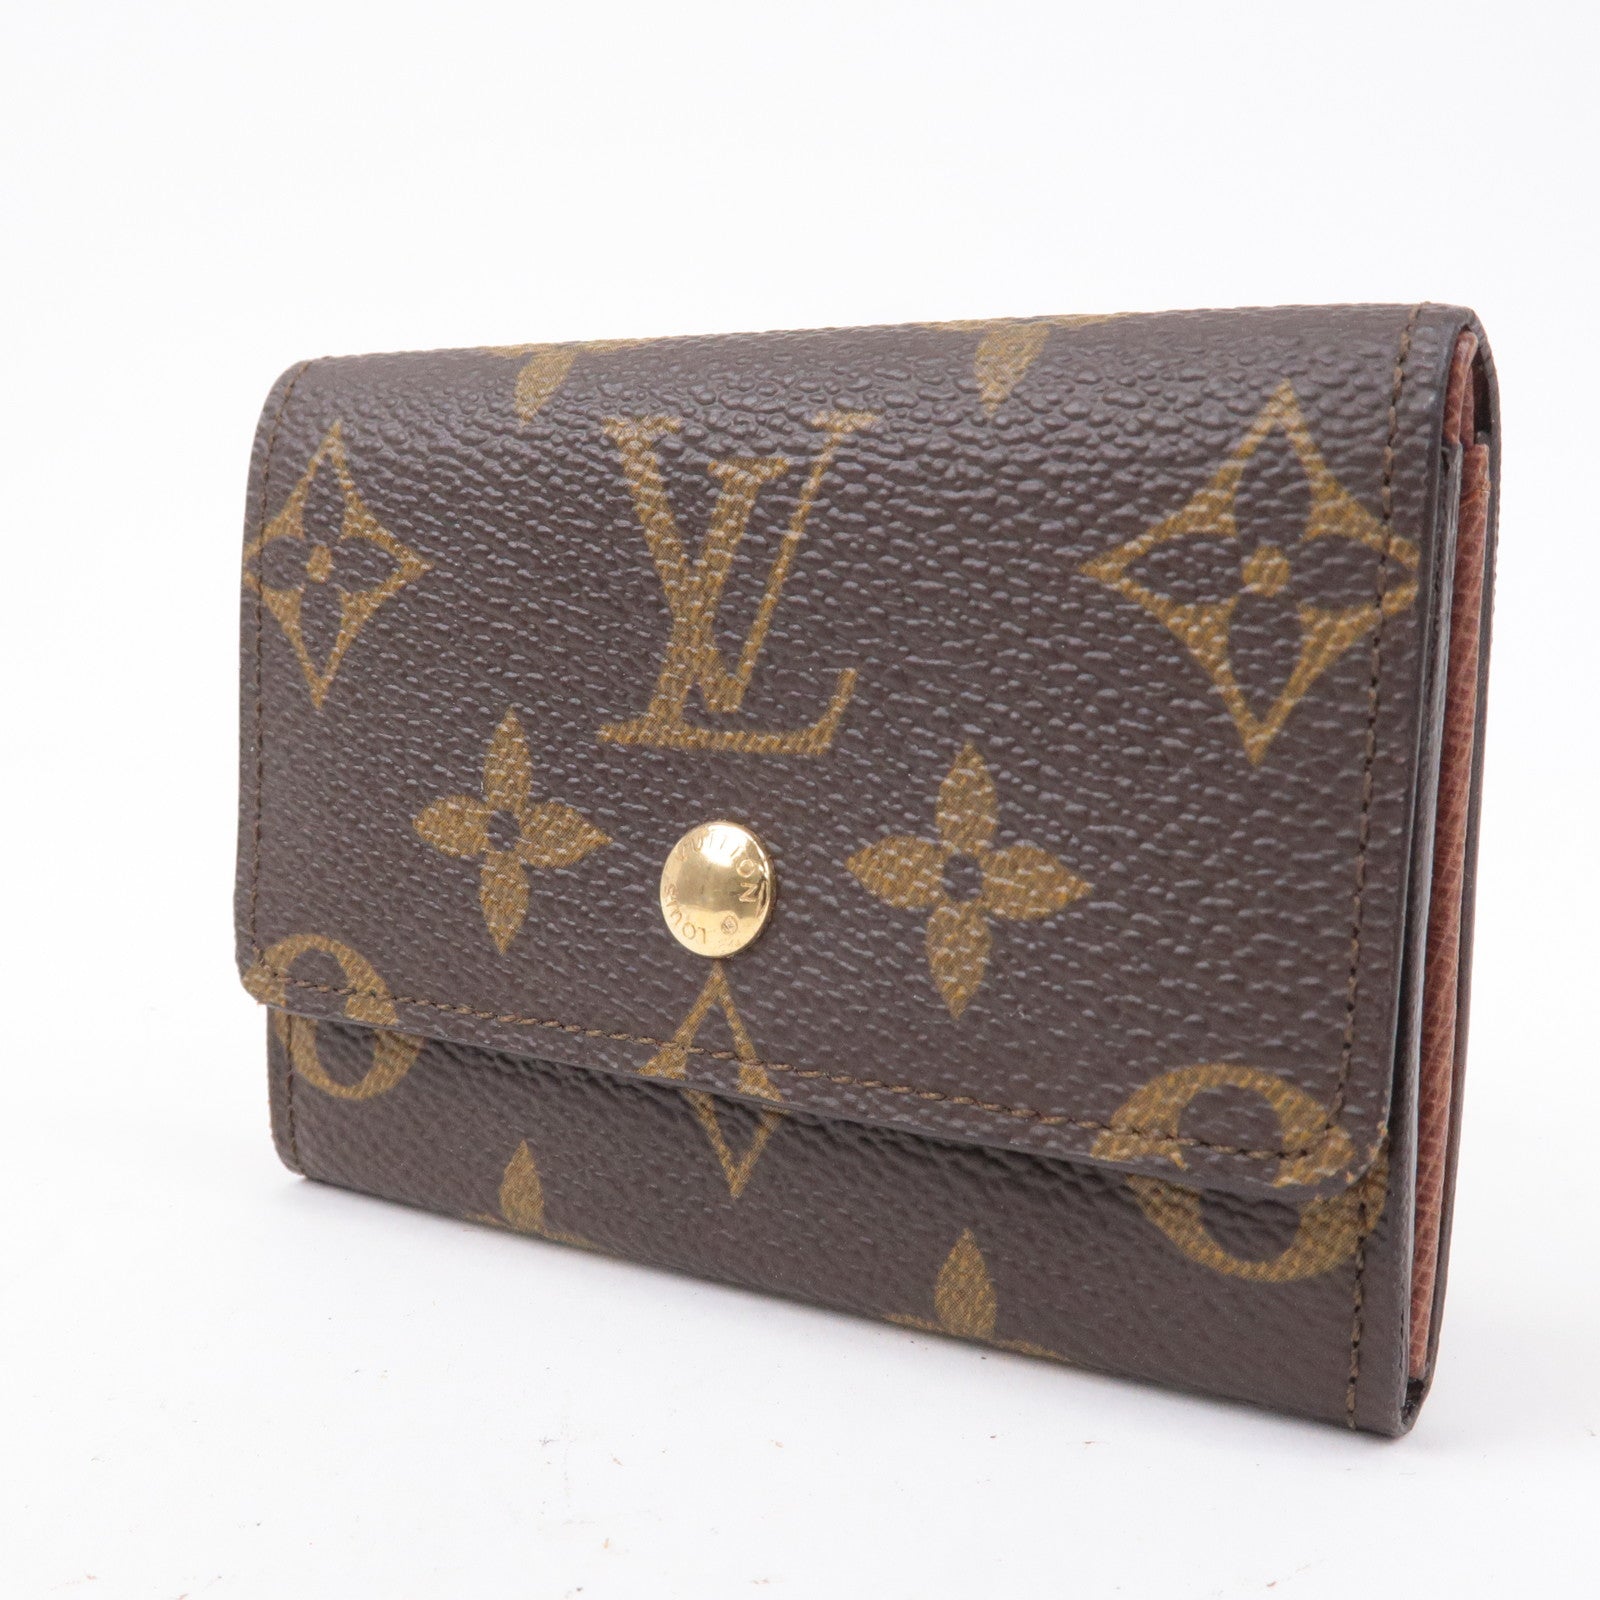 Louis Vuitton 2008 pre-owned monogram card holder - Brown 